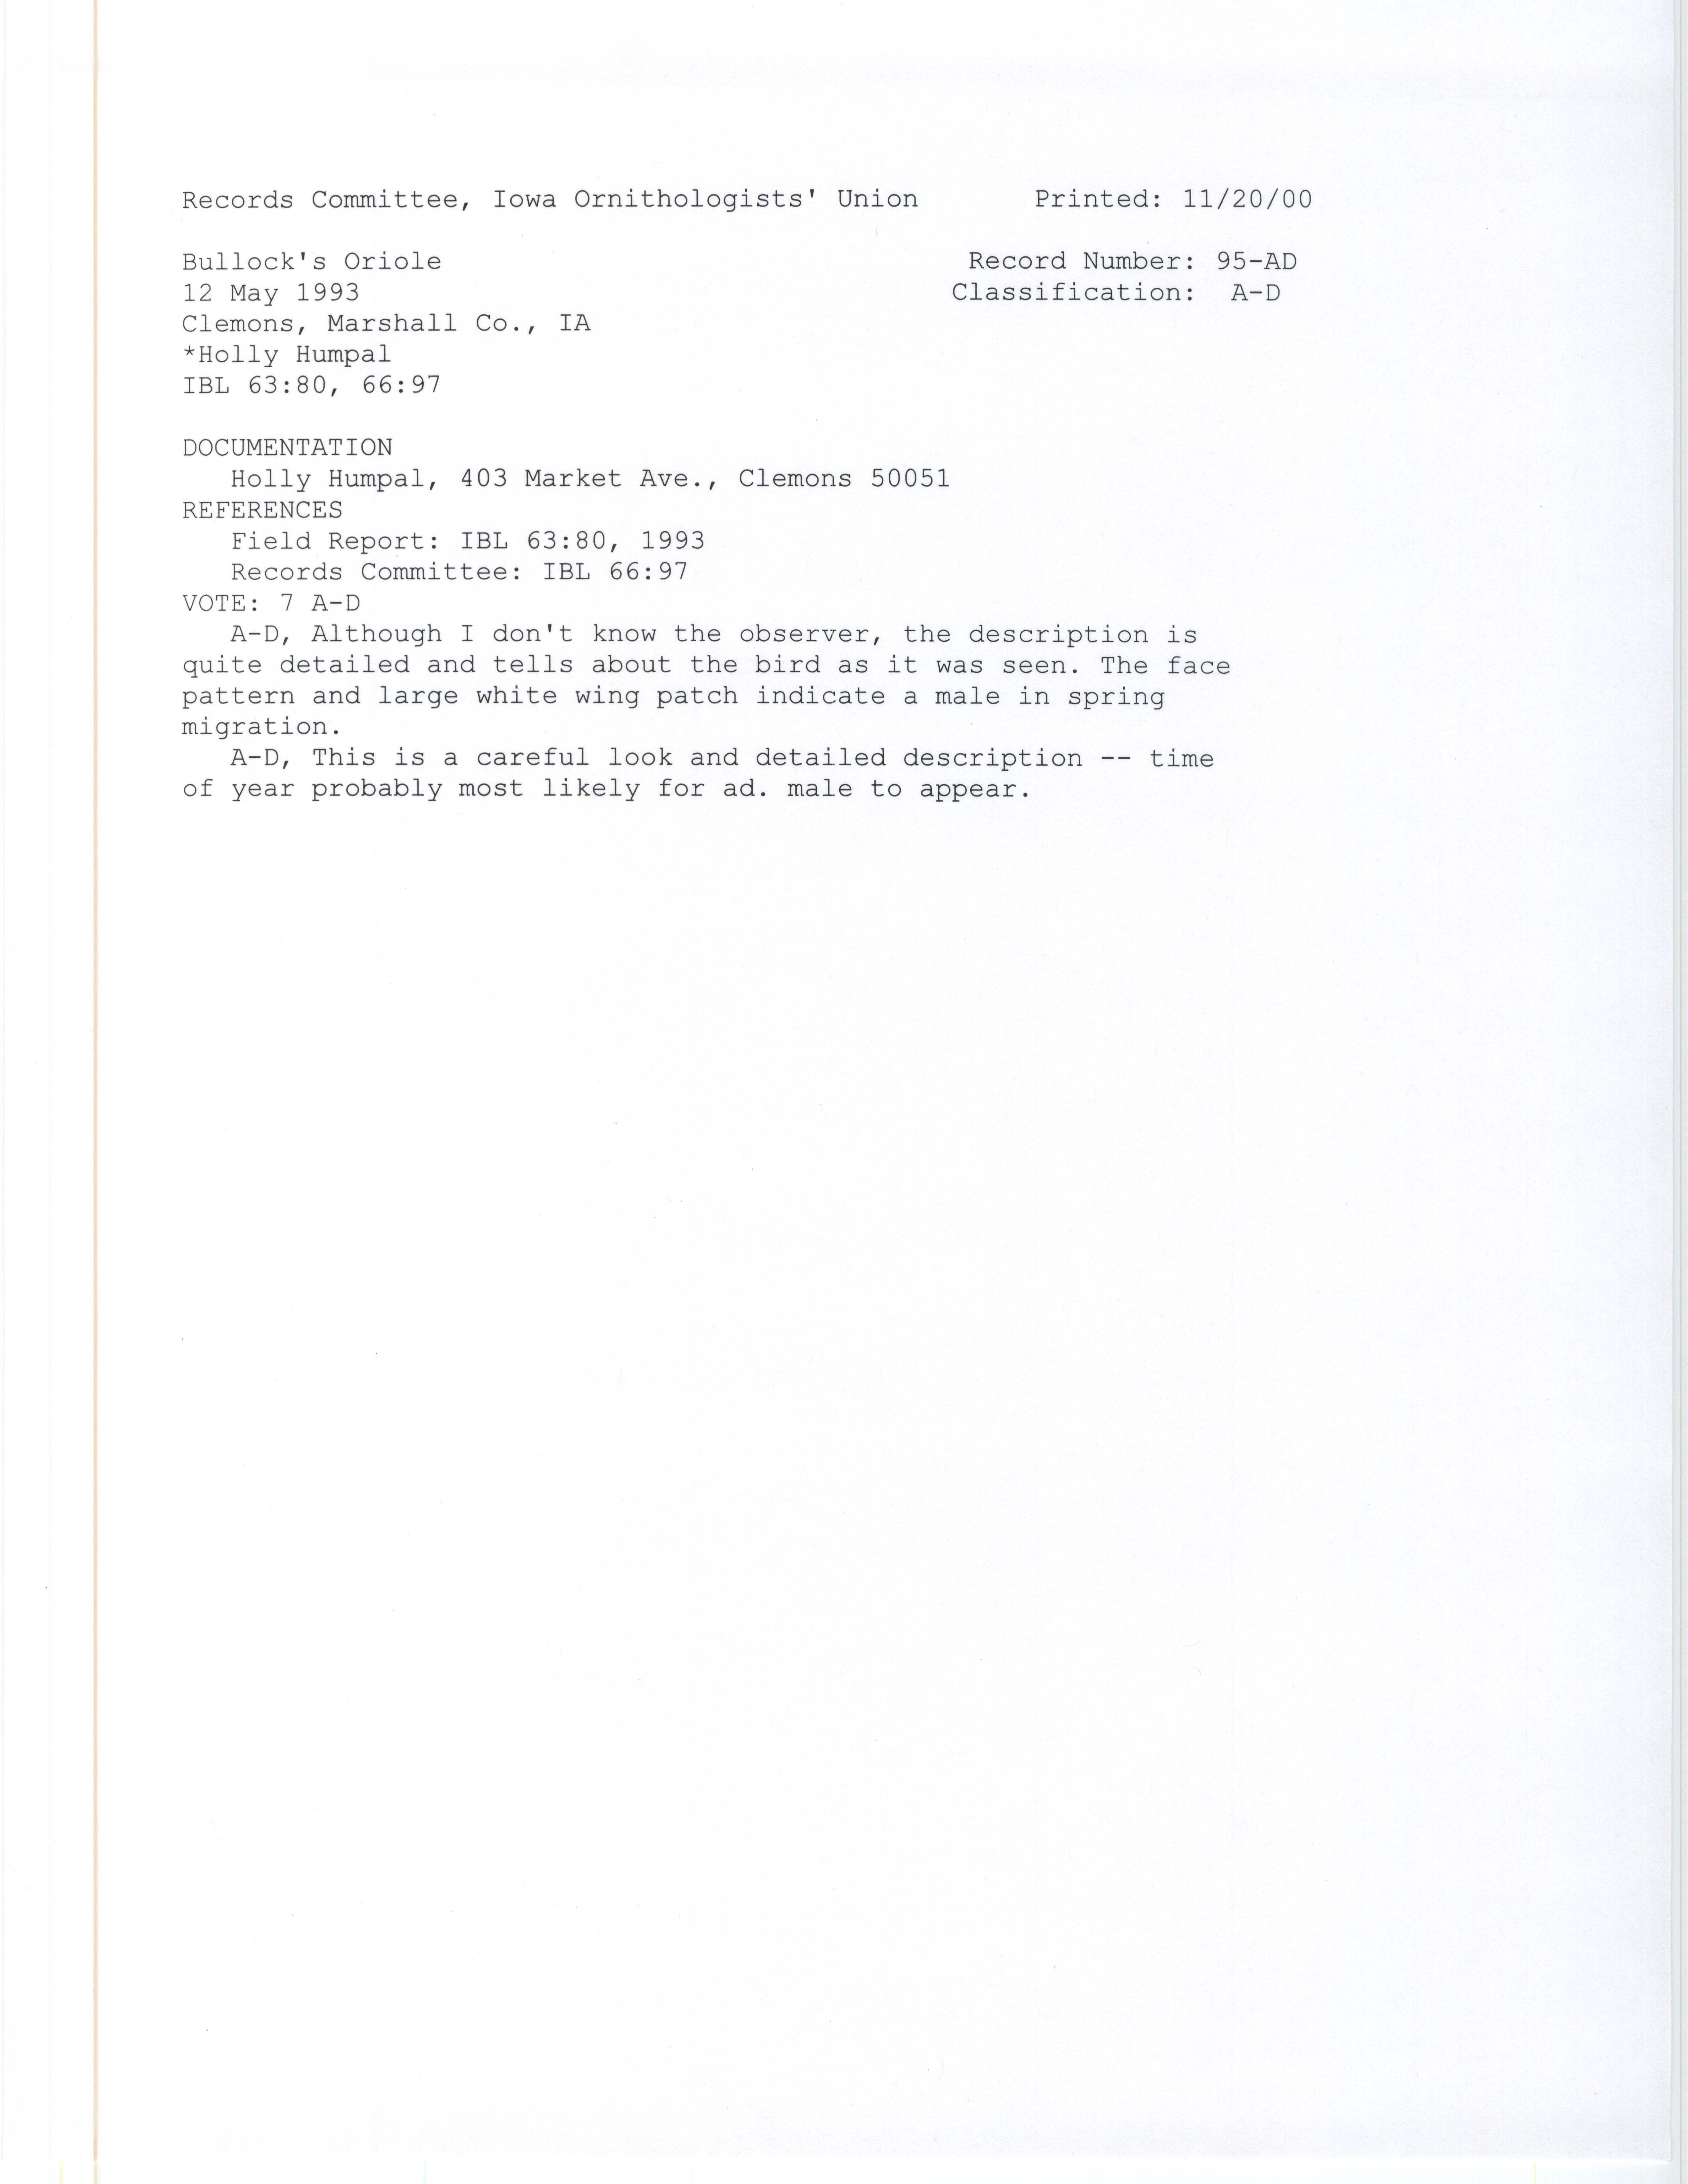 Records Committee review for rare bird sighting for Bullock's Oriole at Clemons, 1993